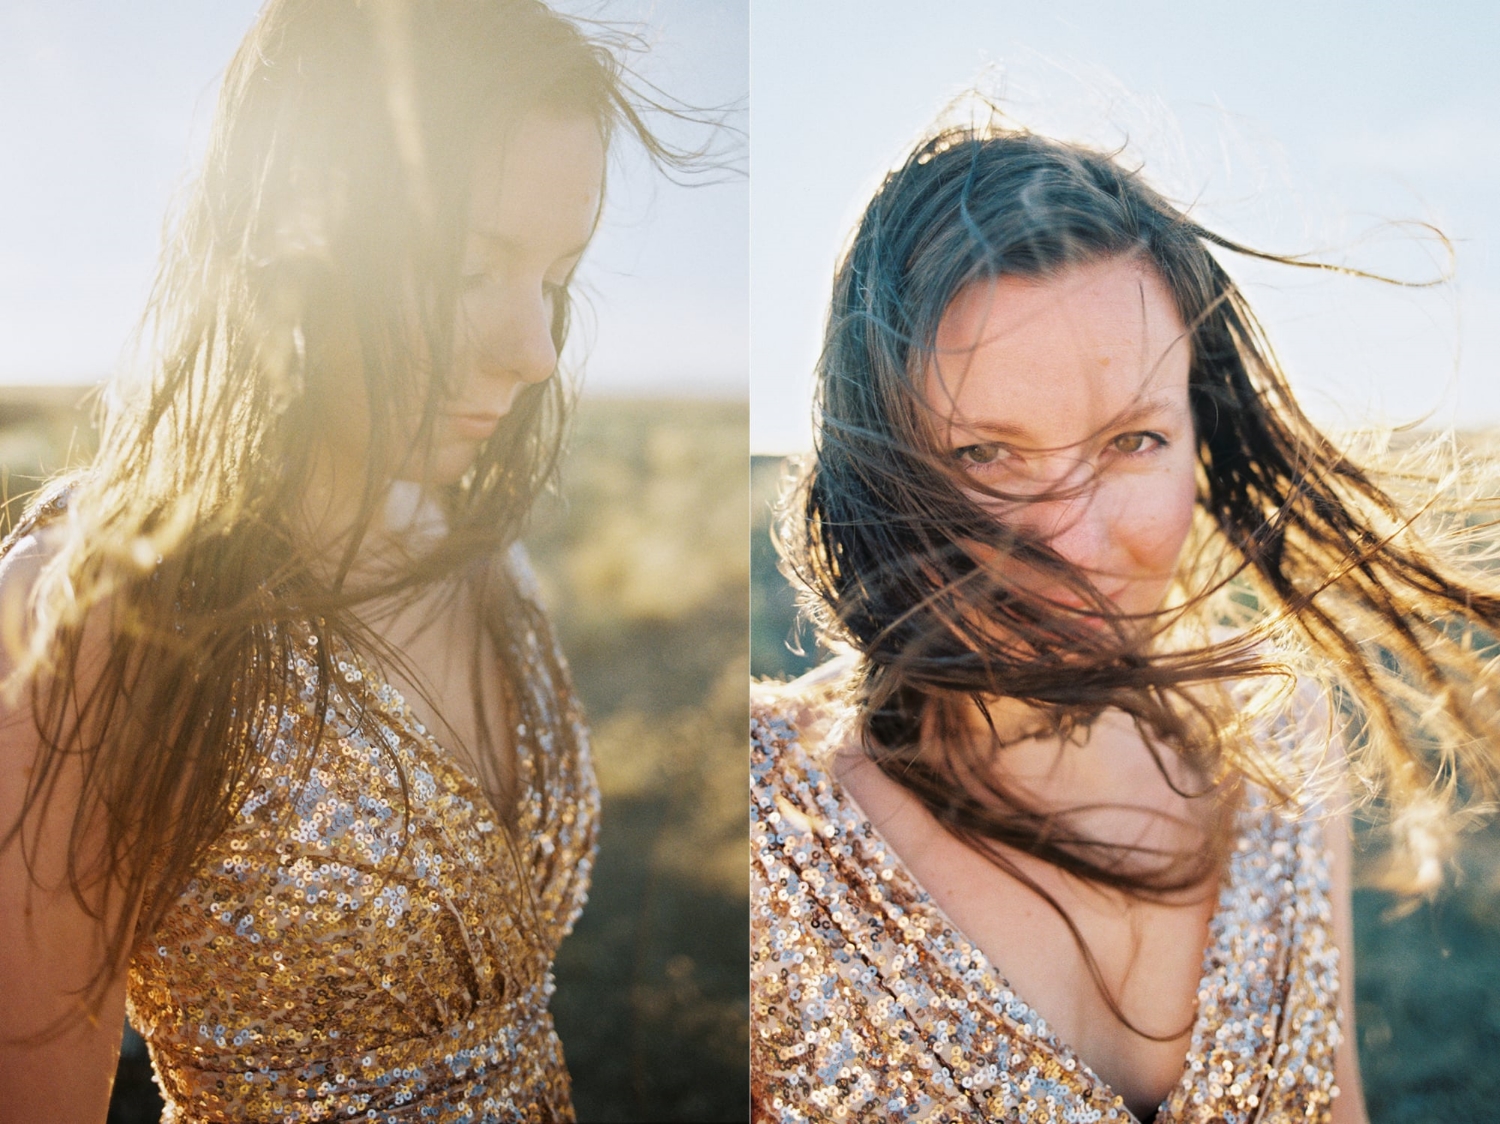 Couples Portraits with a Badgley Mischka gown at Wild Horse Wind Farm in Eastern Washington.